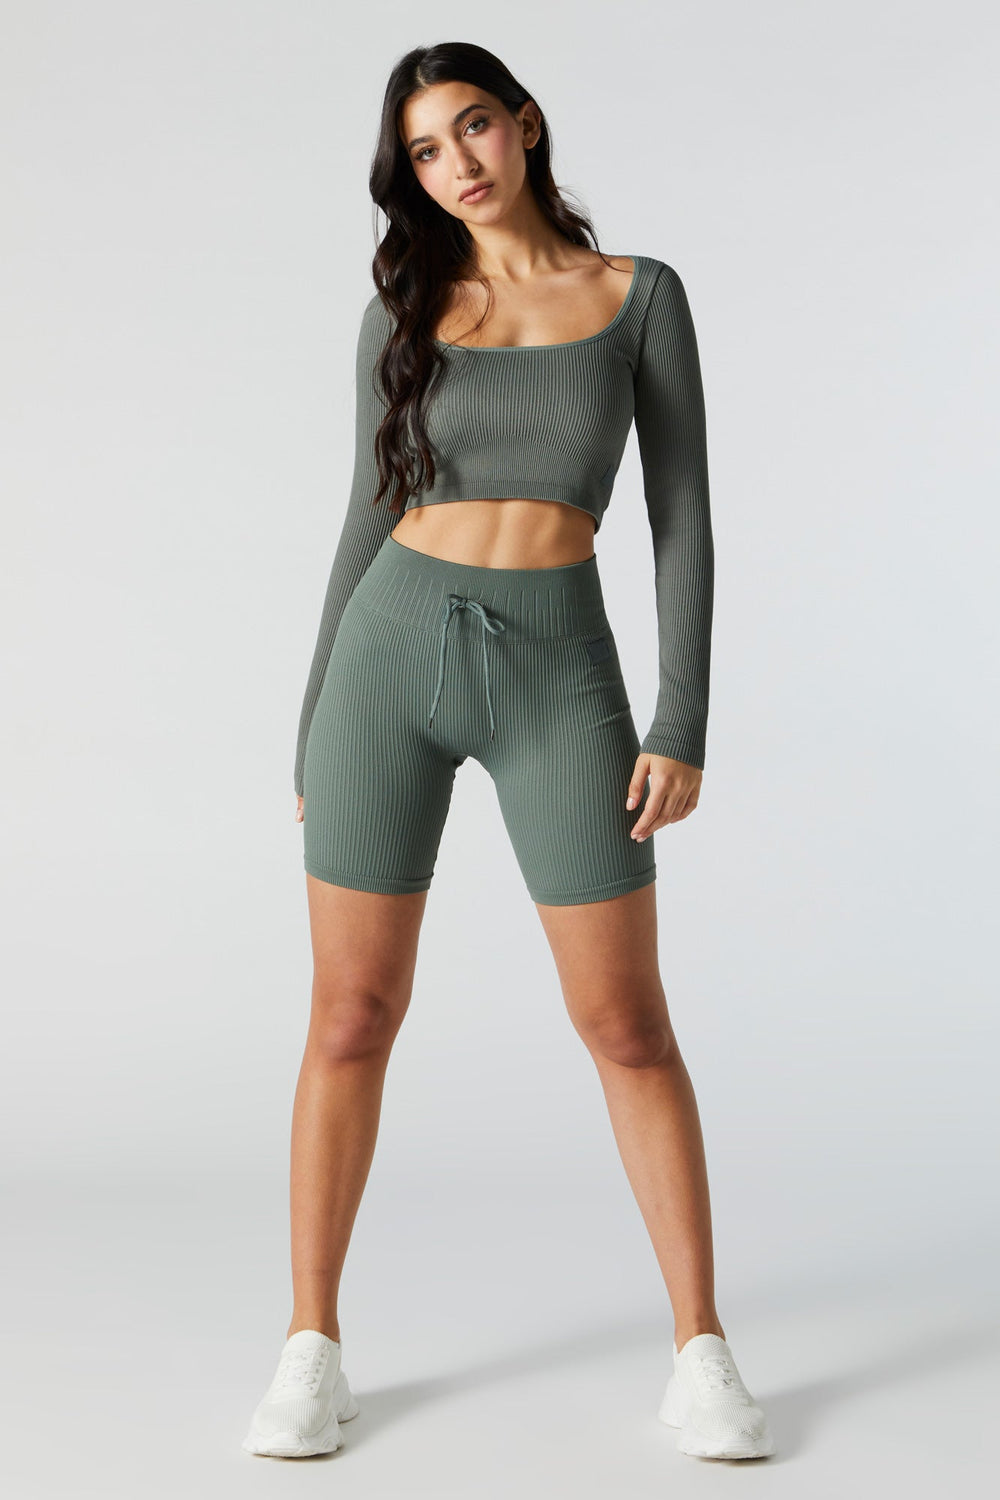 Green Sommer Ray Active Seamless Long Sleeve Top Green Sommer Ray Active Seamless Long Sleeve Top 3